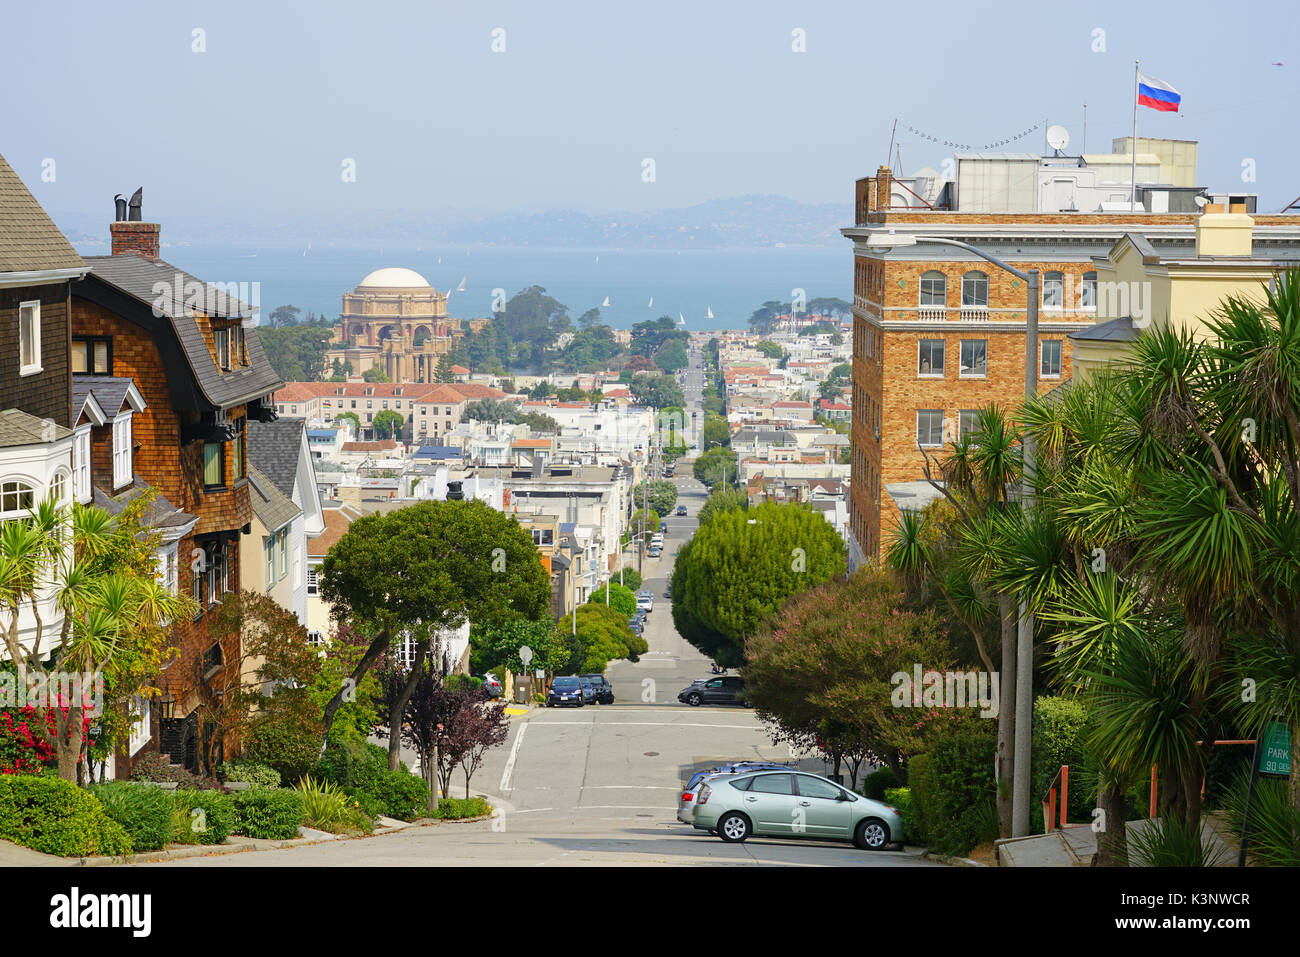 The Russian Consulate General in San Francisco located on 2790 Green Street in Pacific Heights. It was closed by the State Department in Sep 2017. Stock Photo